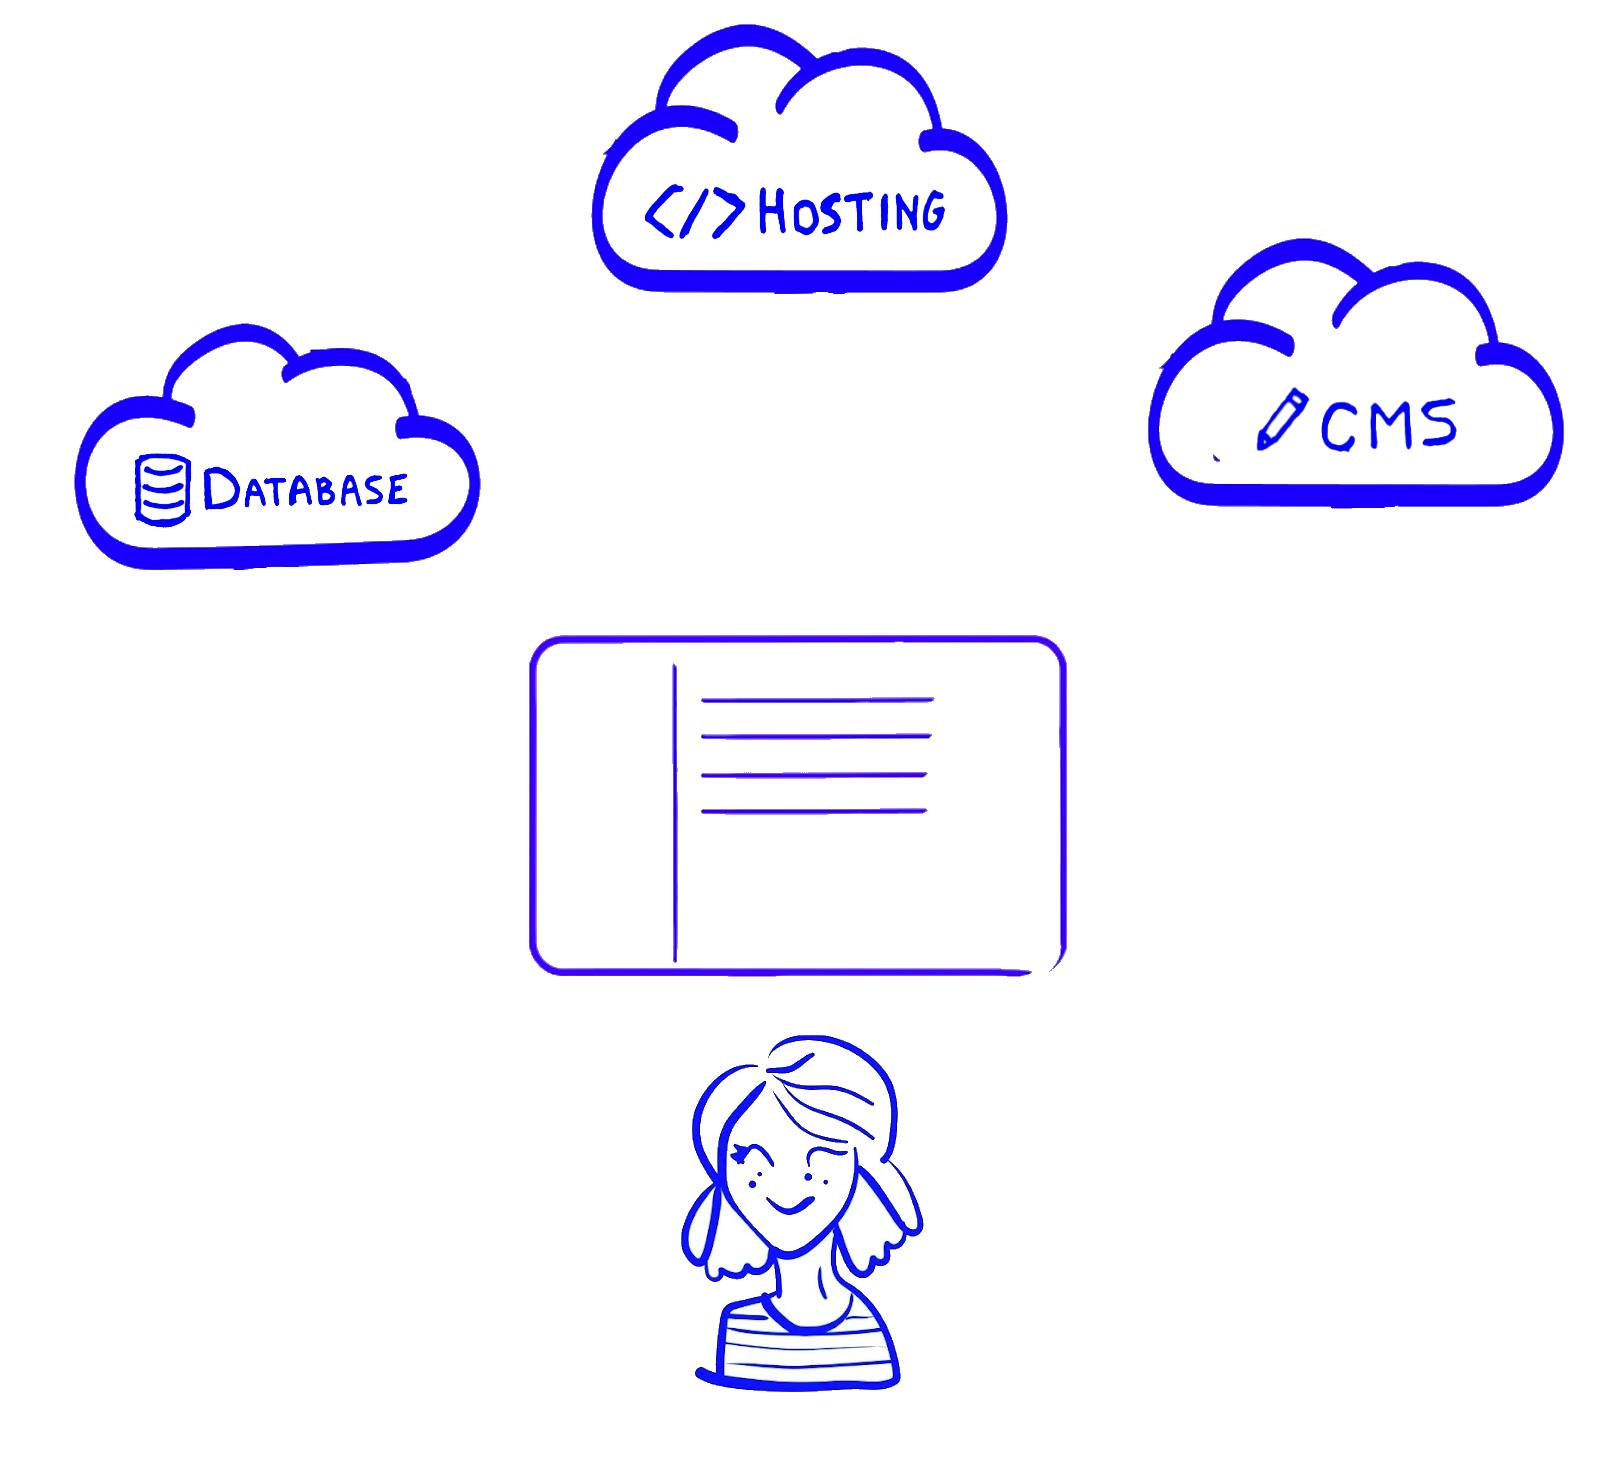 Illustration representing a user with a draft of a website over it and clouds representing the database, hosting and CMS